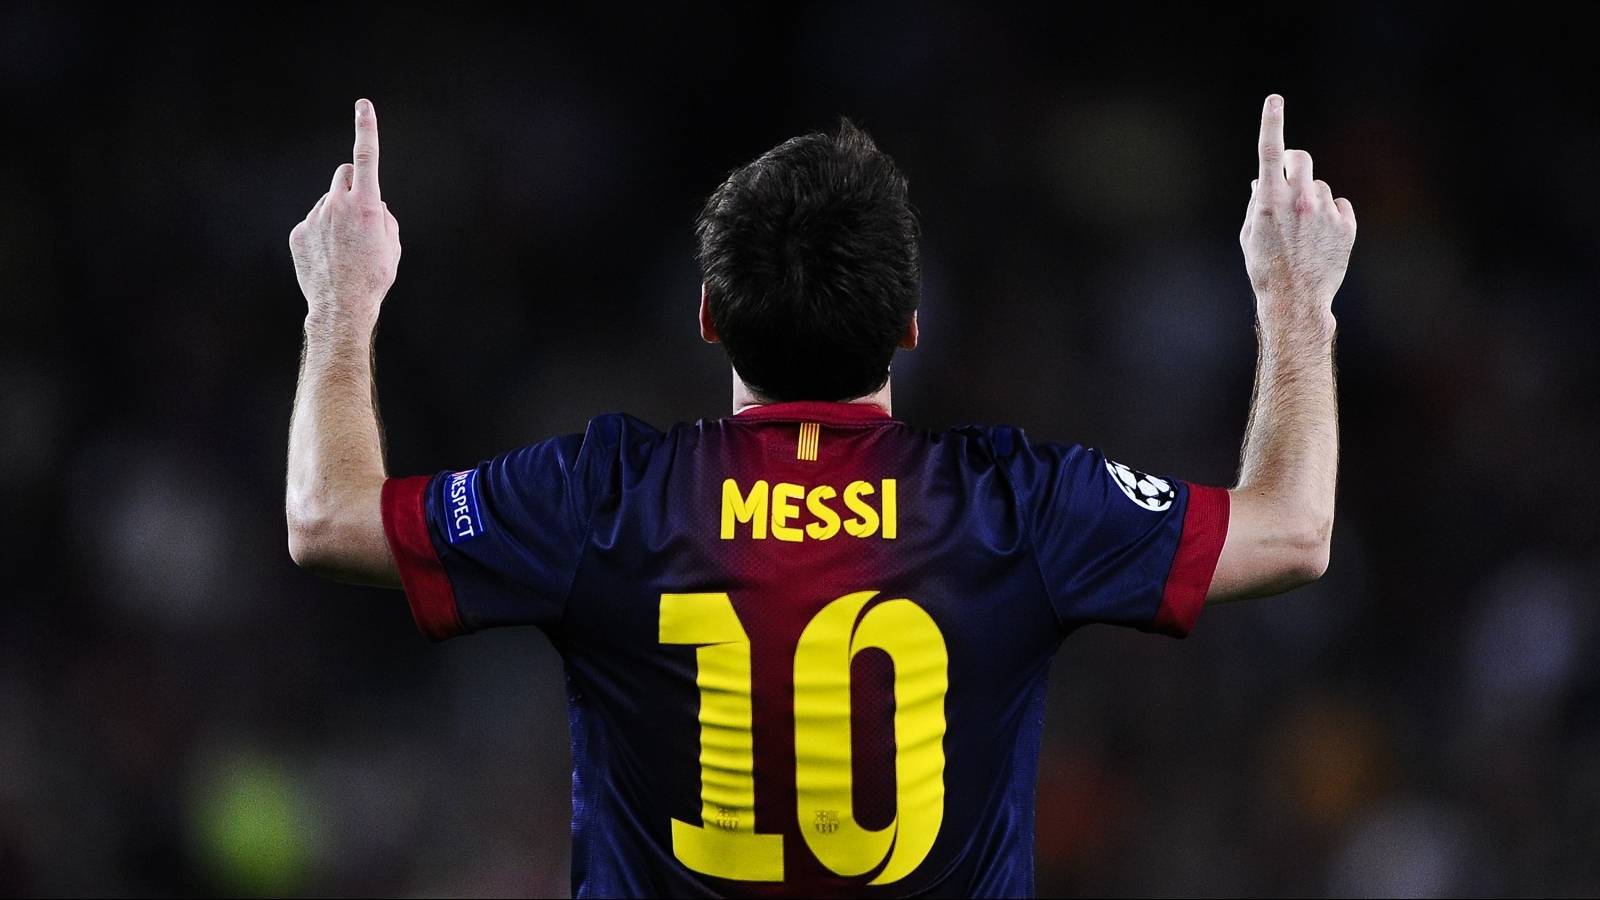 lionel andres messi, people, men, sports, football, black cellphone